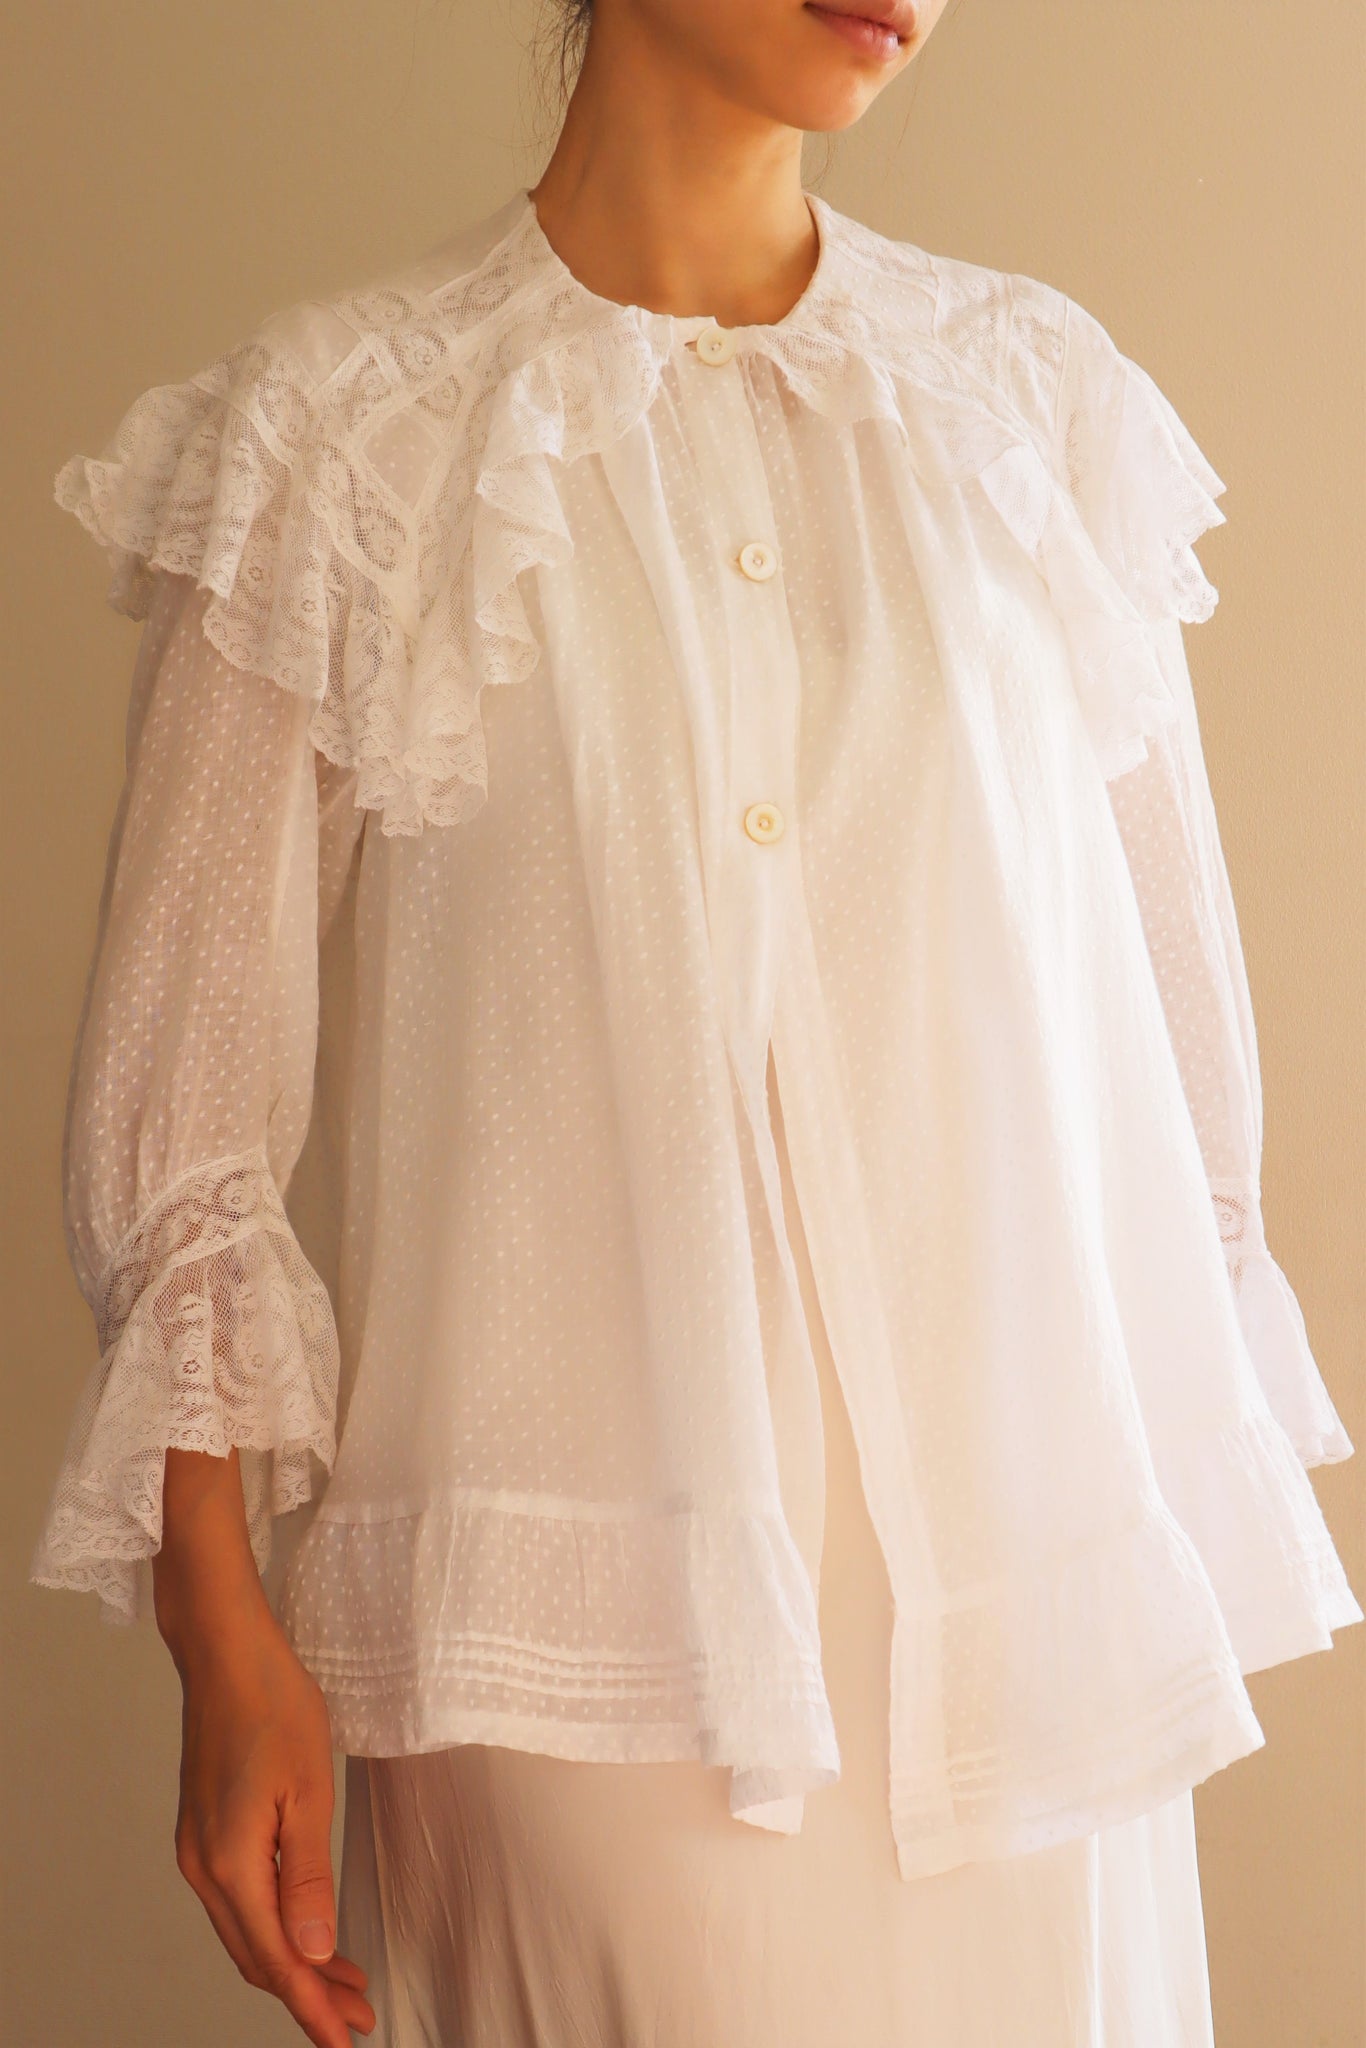 1880s Lovely Belle Epoque Era Frilled Lace Blouse